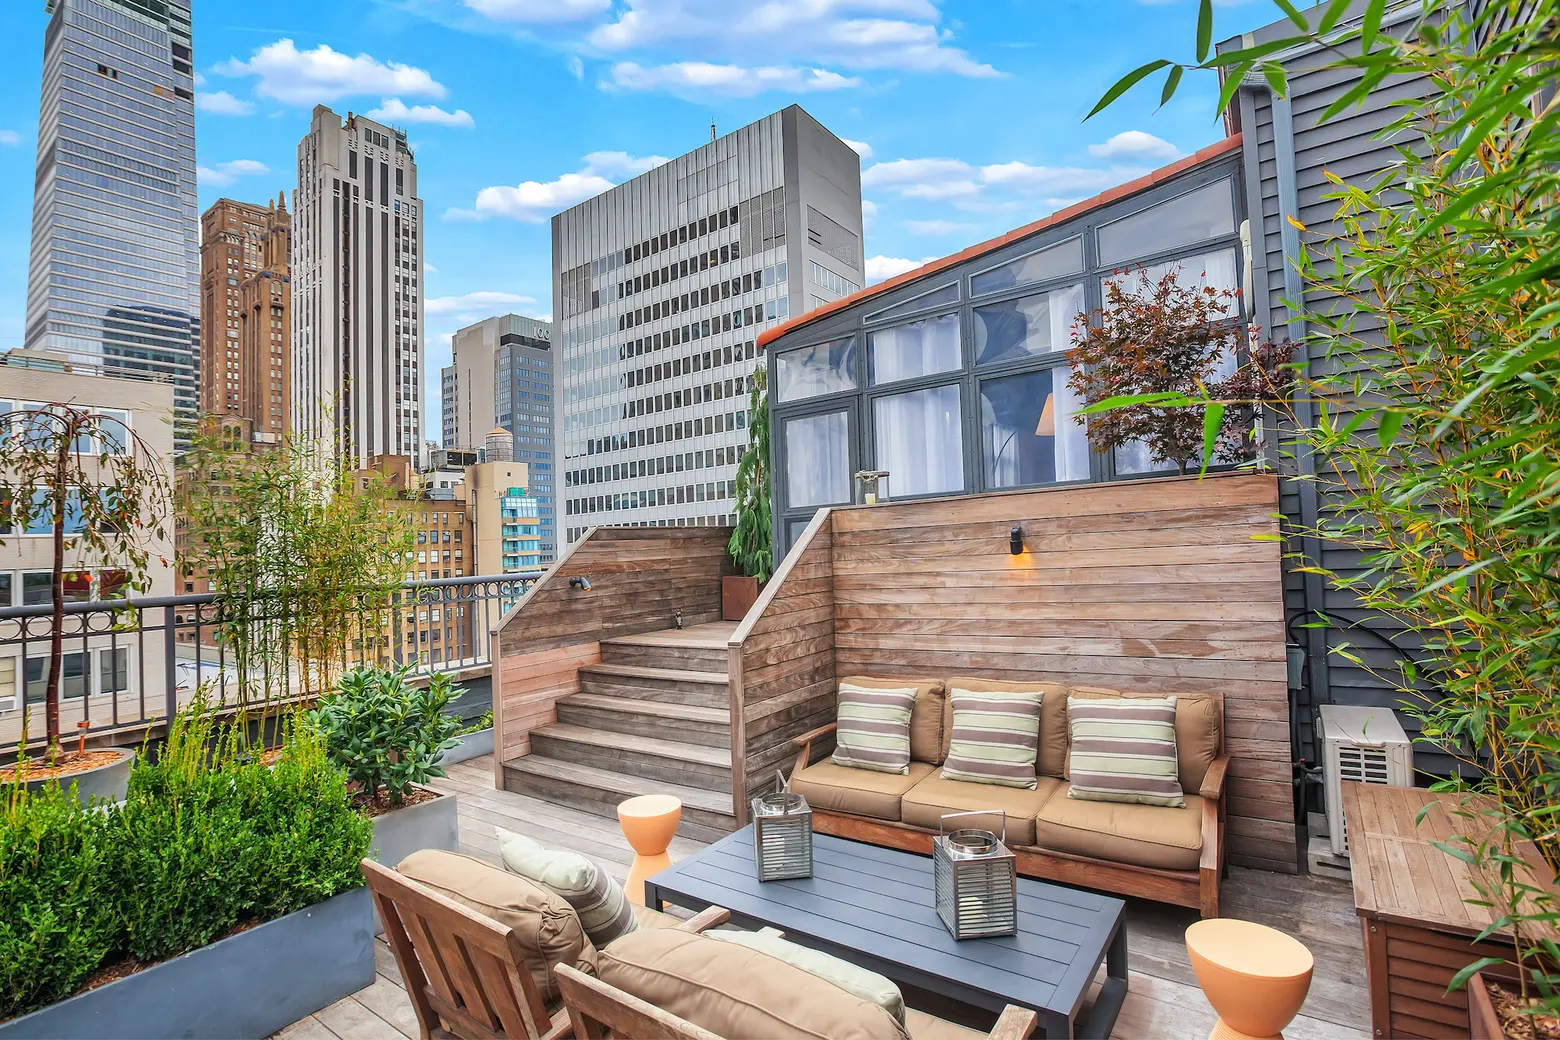 Contemporary Murray Hill penthouse with an incredible terrace asks $3.25M